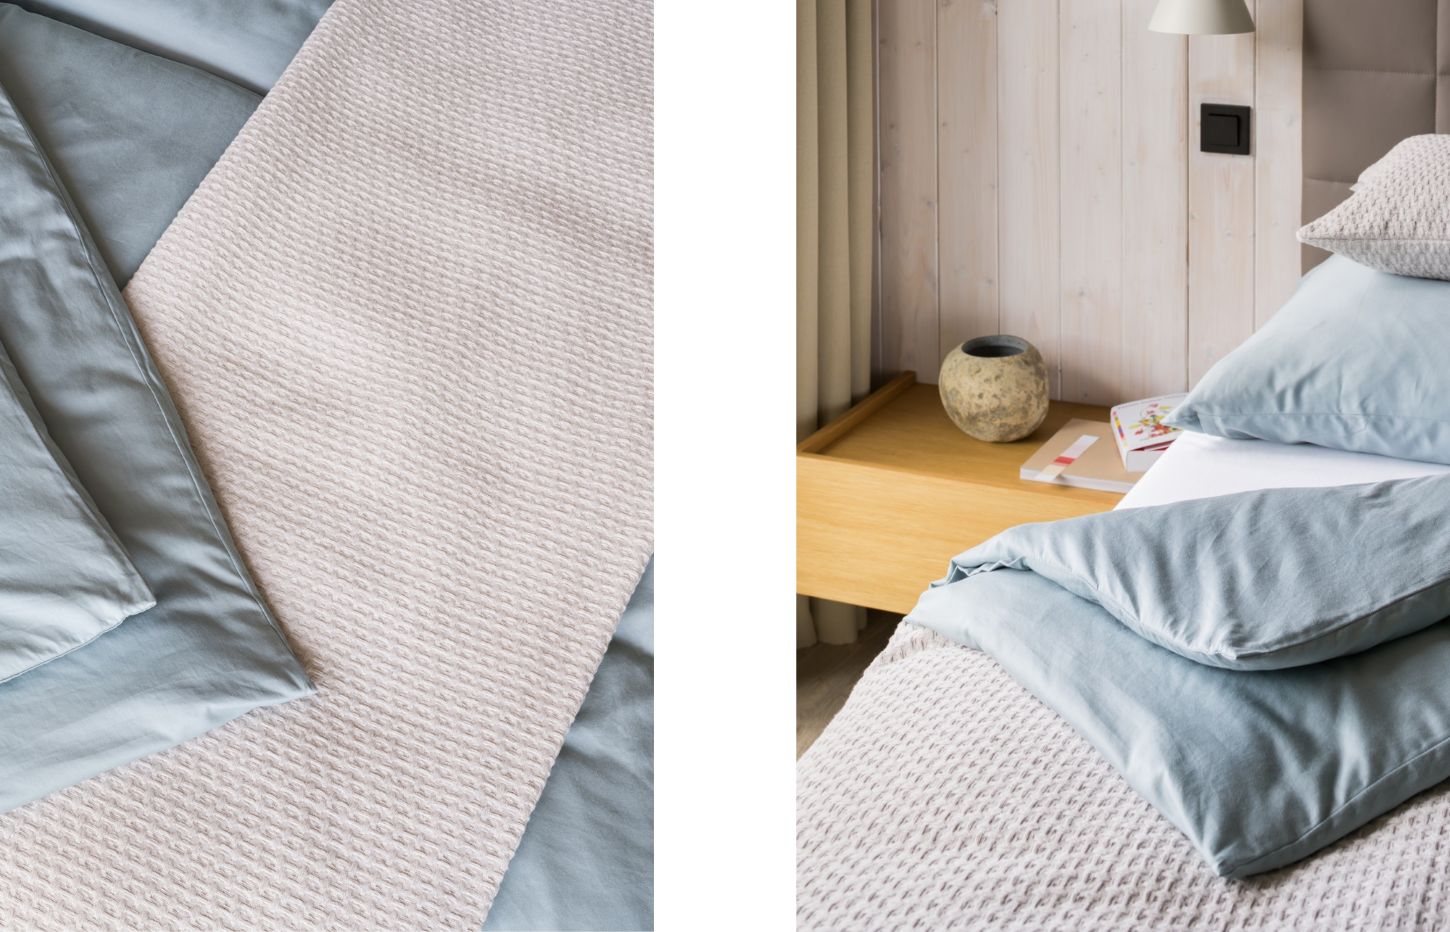 Our lyocell and cotton blend bedding offers comfort and restful nights all year round.